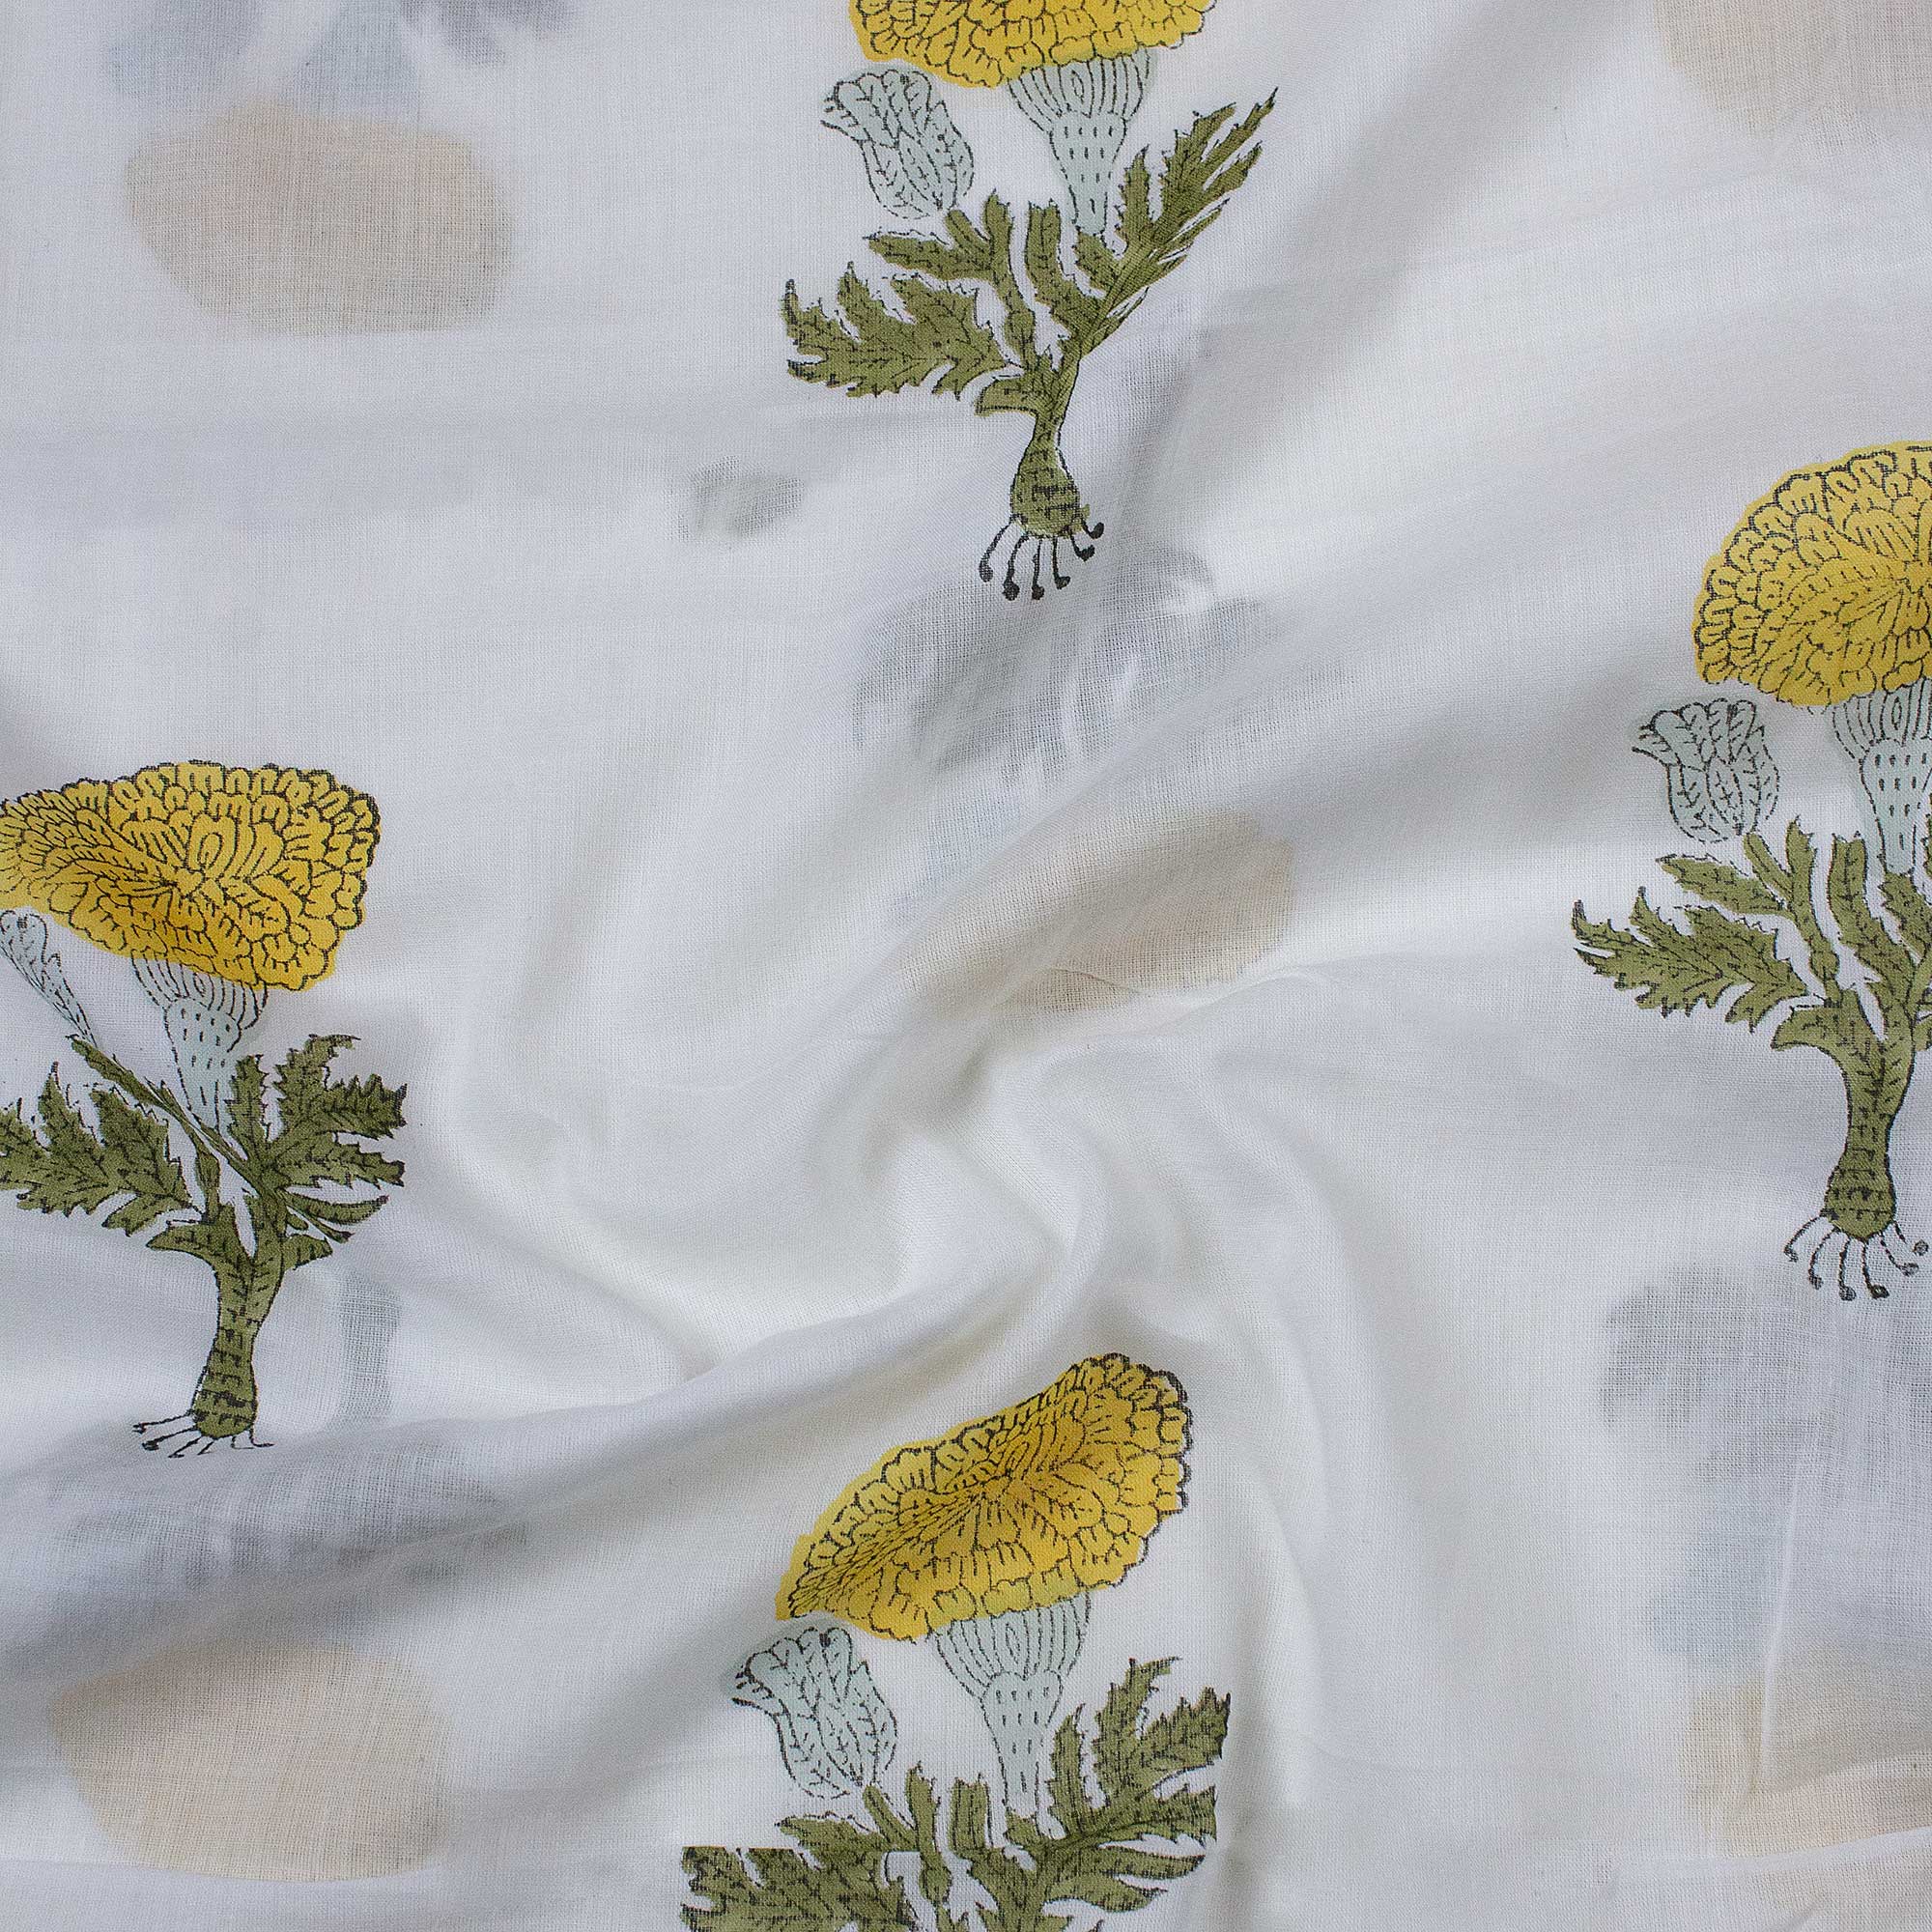 Light Yellow Floral Printed Cotton Fabric